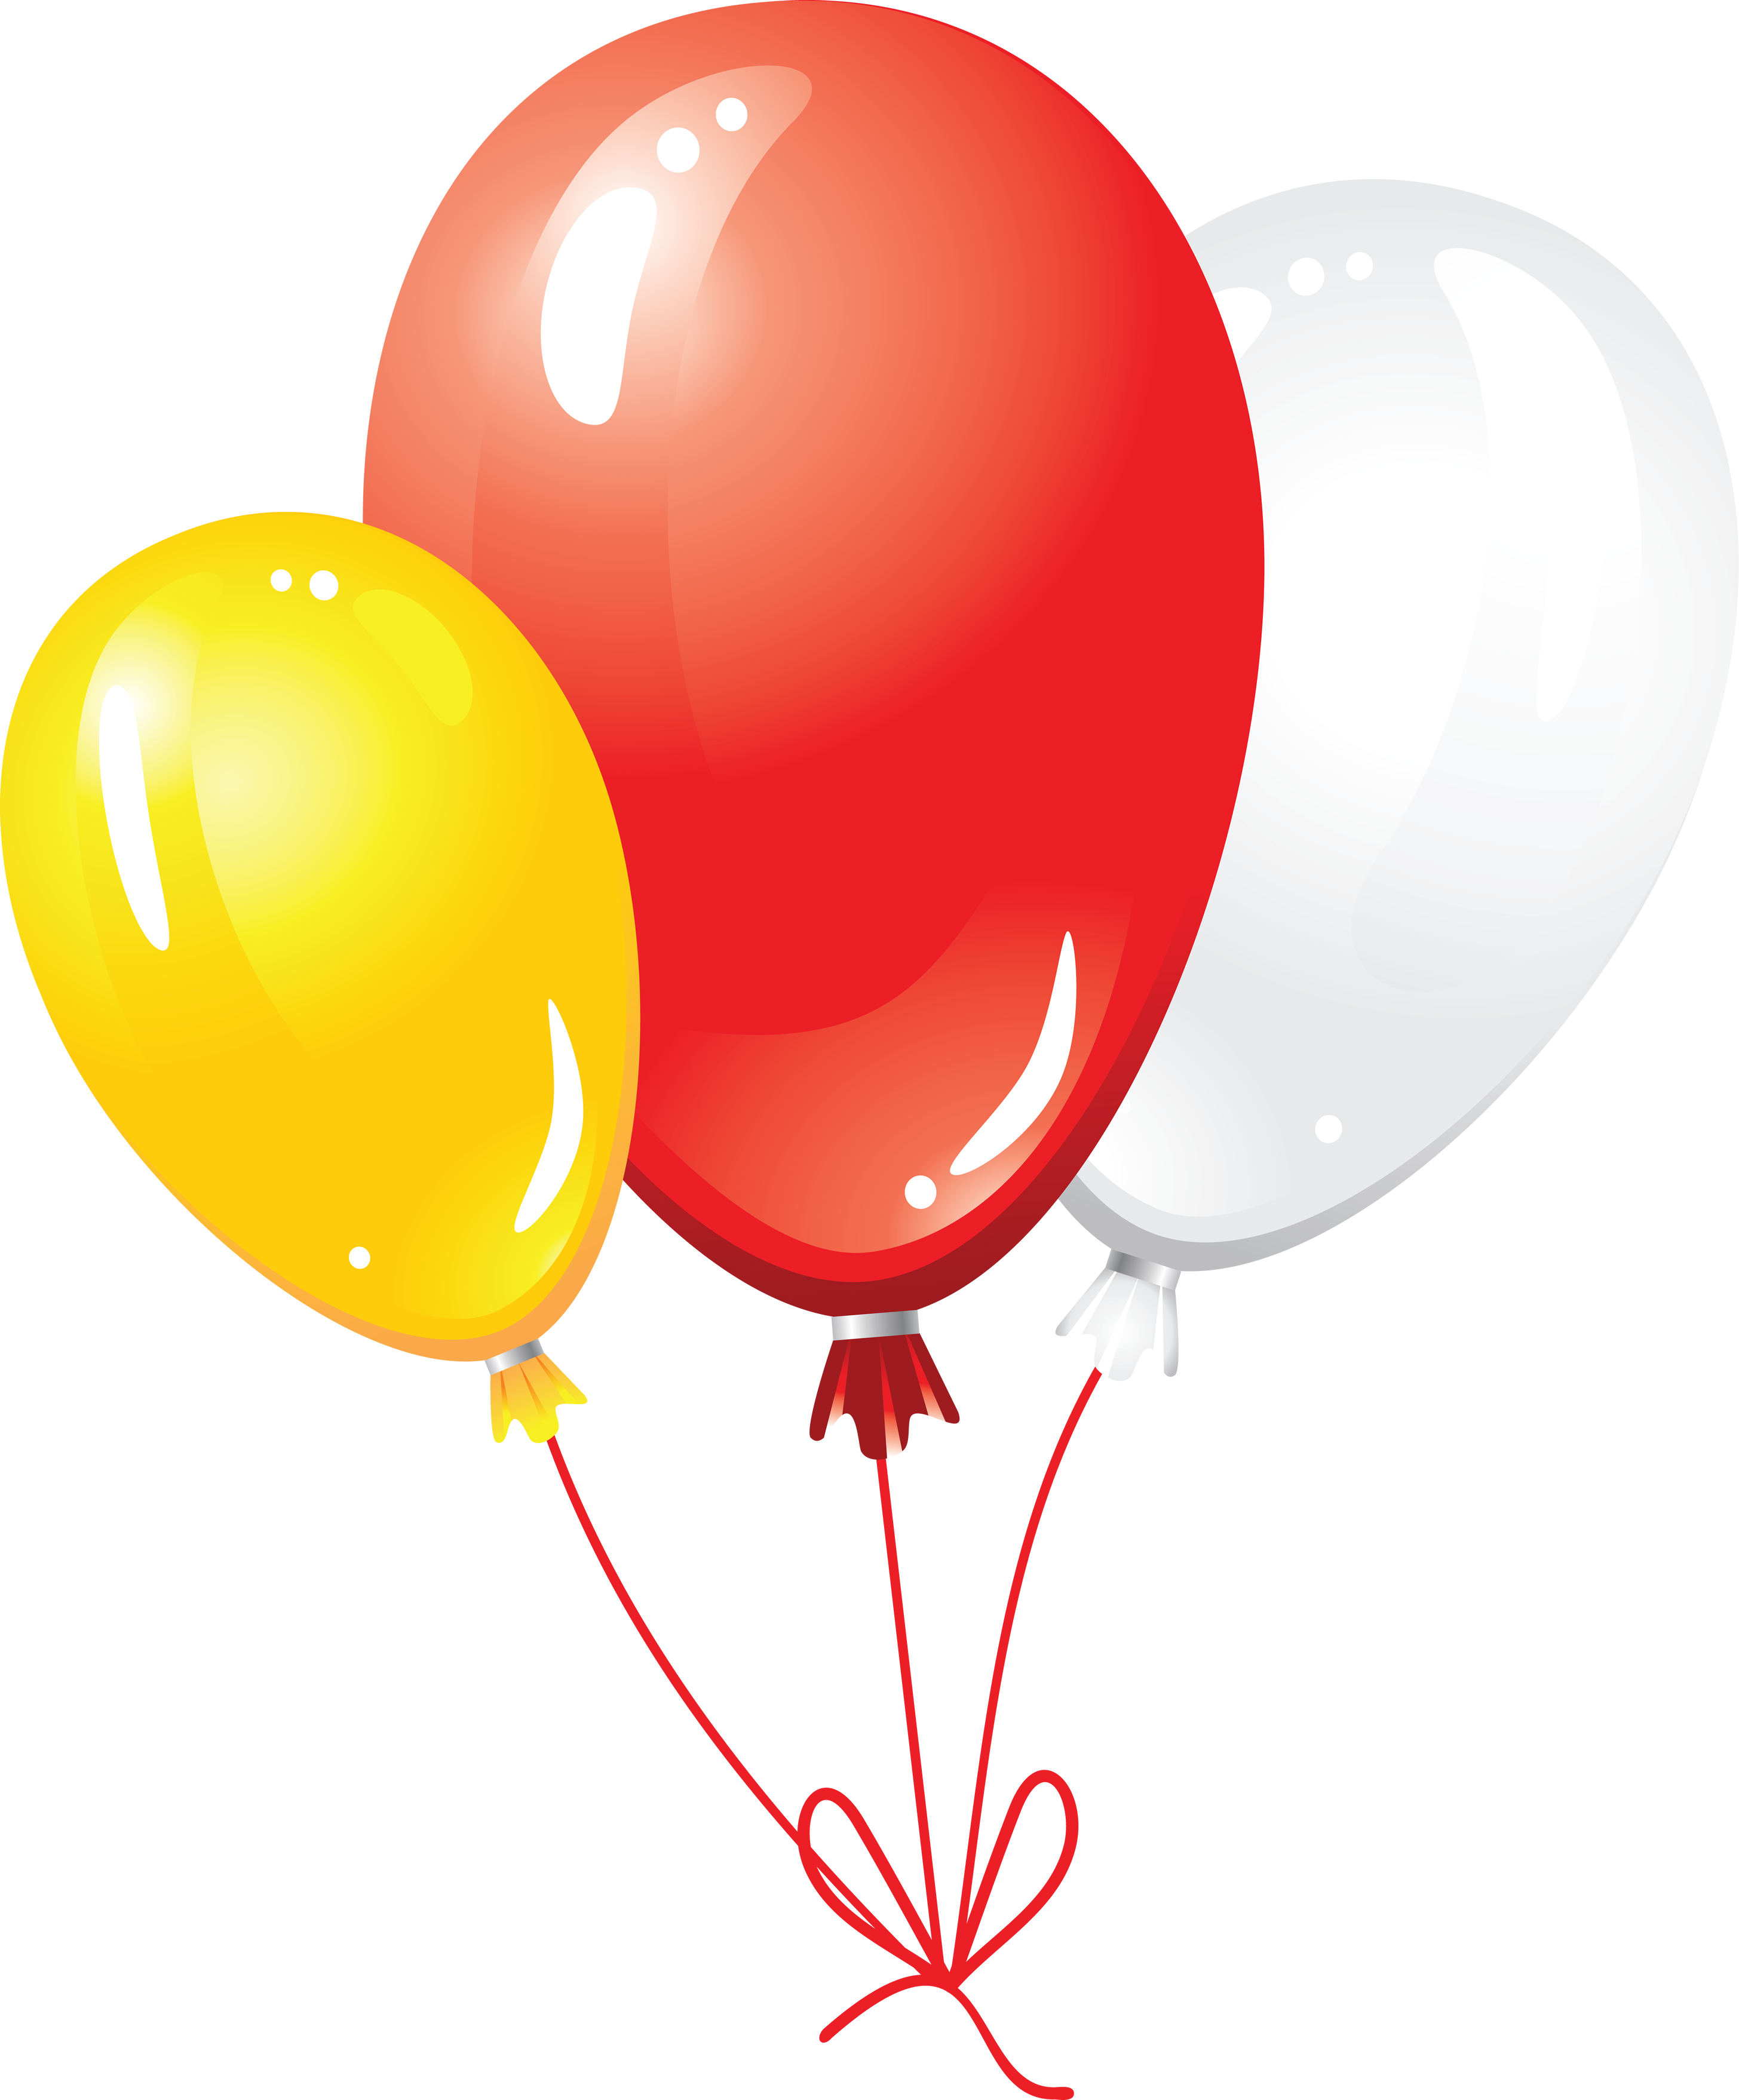 Balloons one isolated stock. Balloon images png